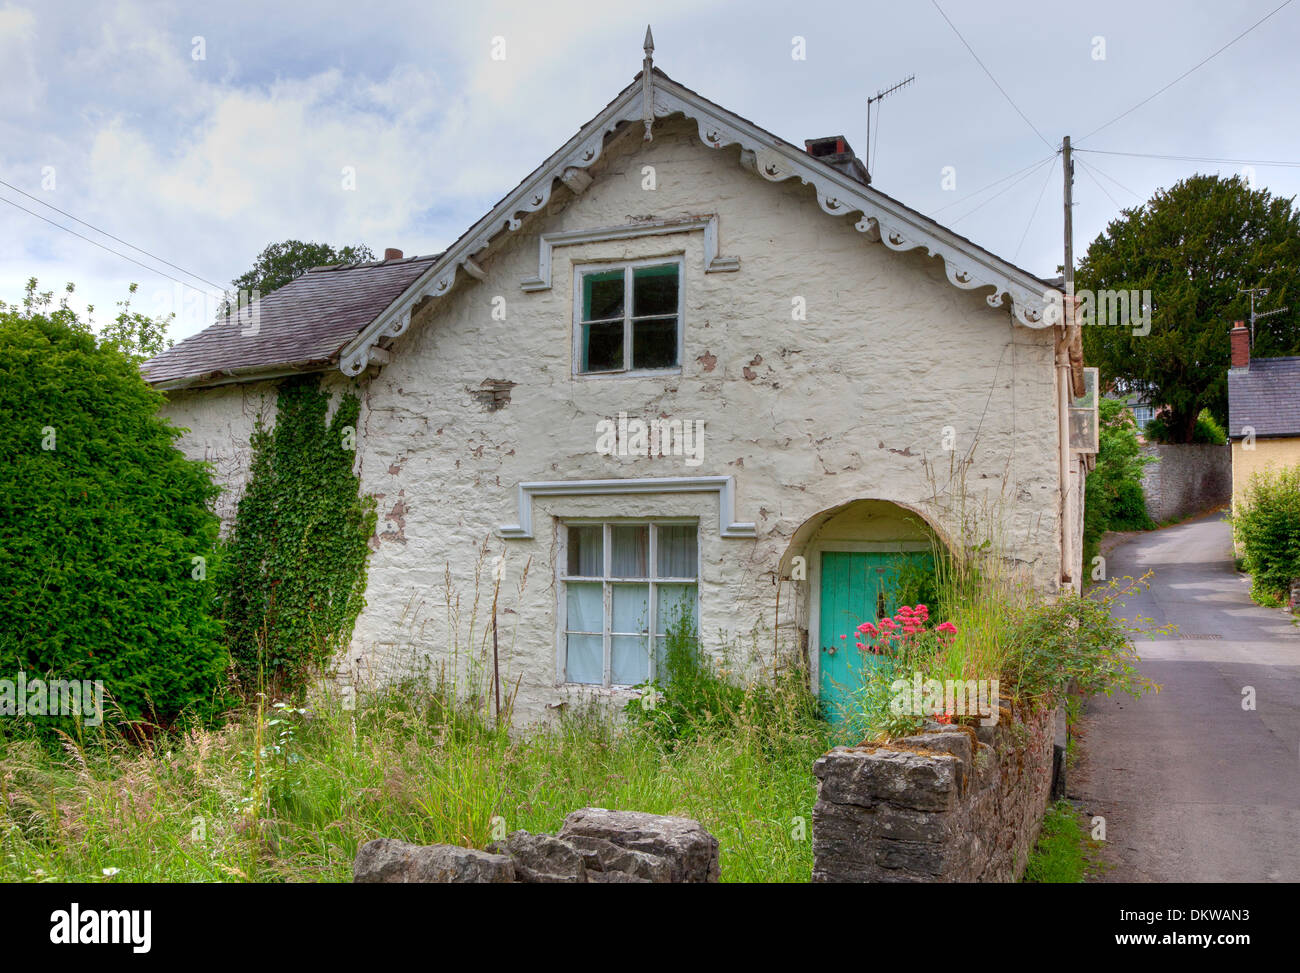 Old overgrown cottage, Clun, Shropshire, England. Stock Photo